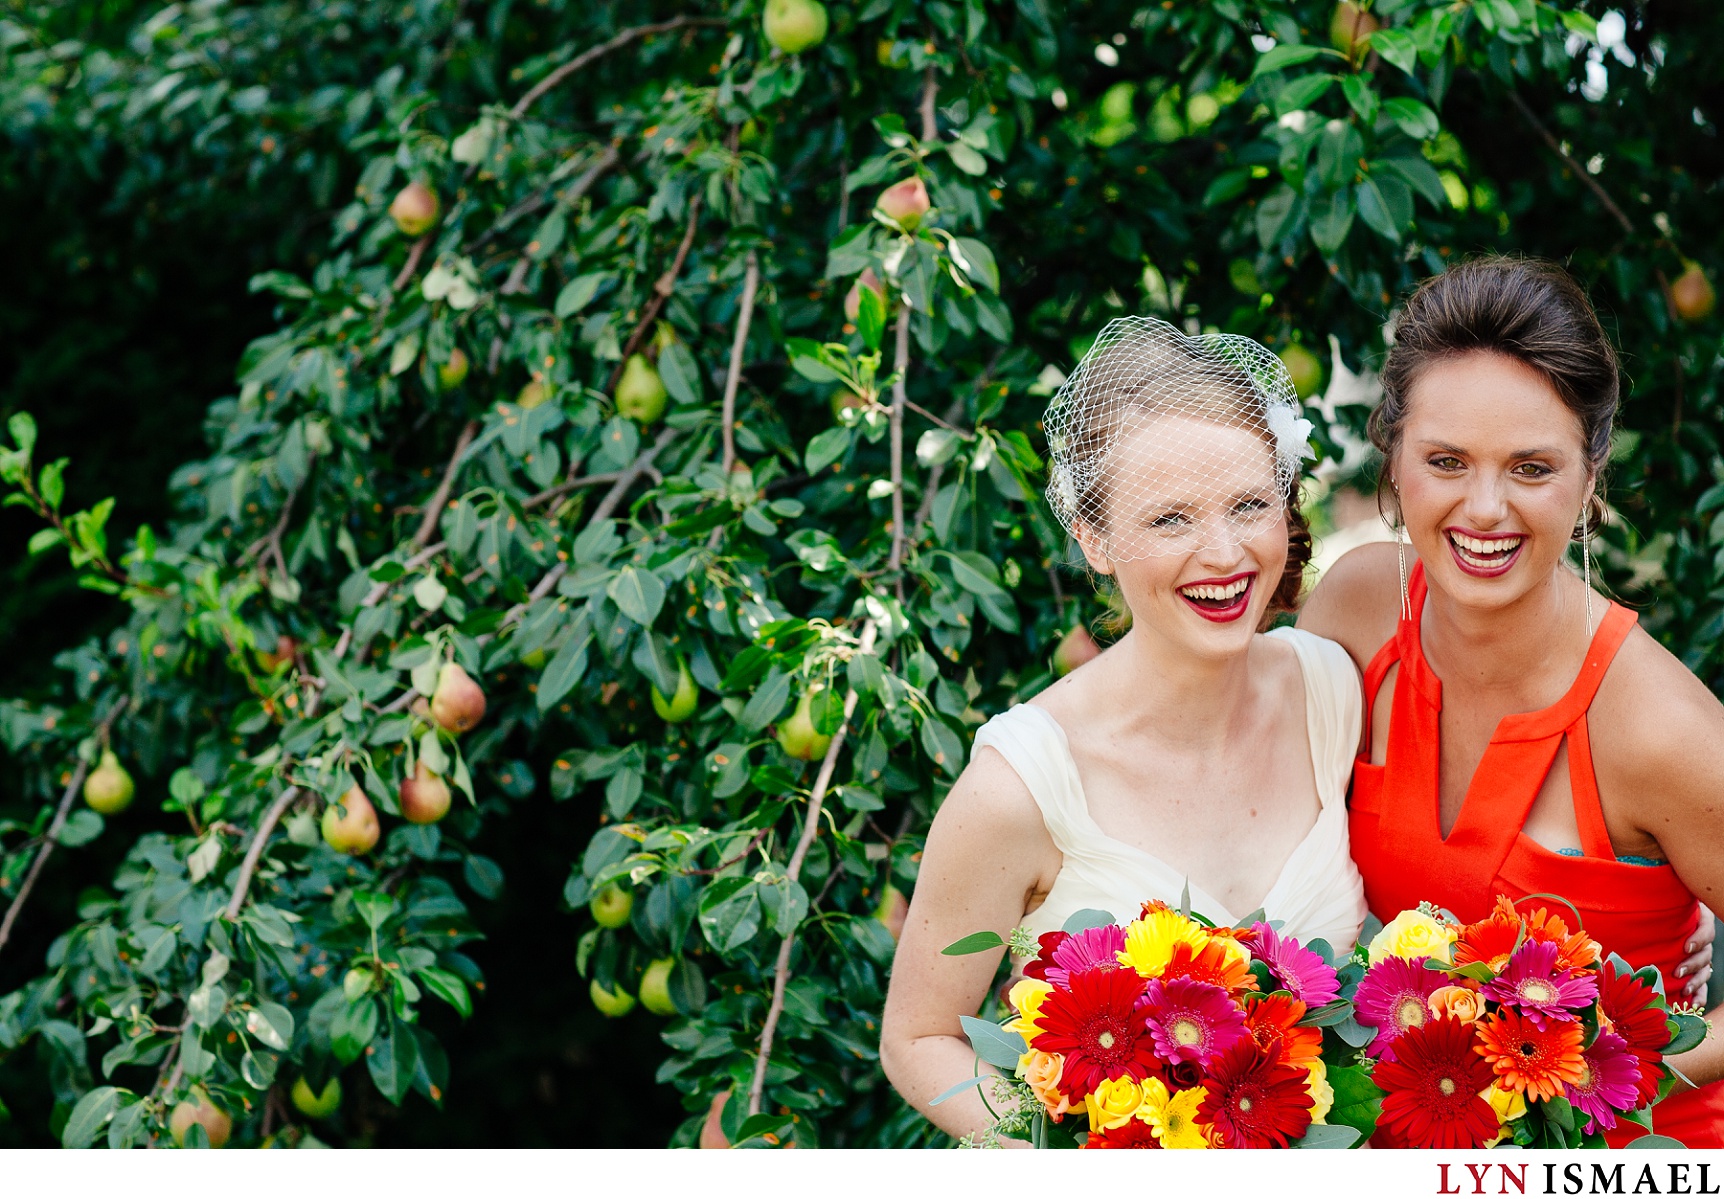 The bride with a colourful bouquet and a bridesmaid with orange dress.